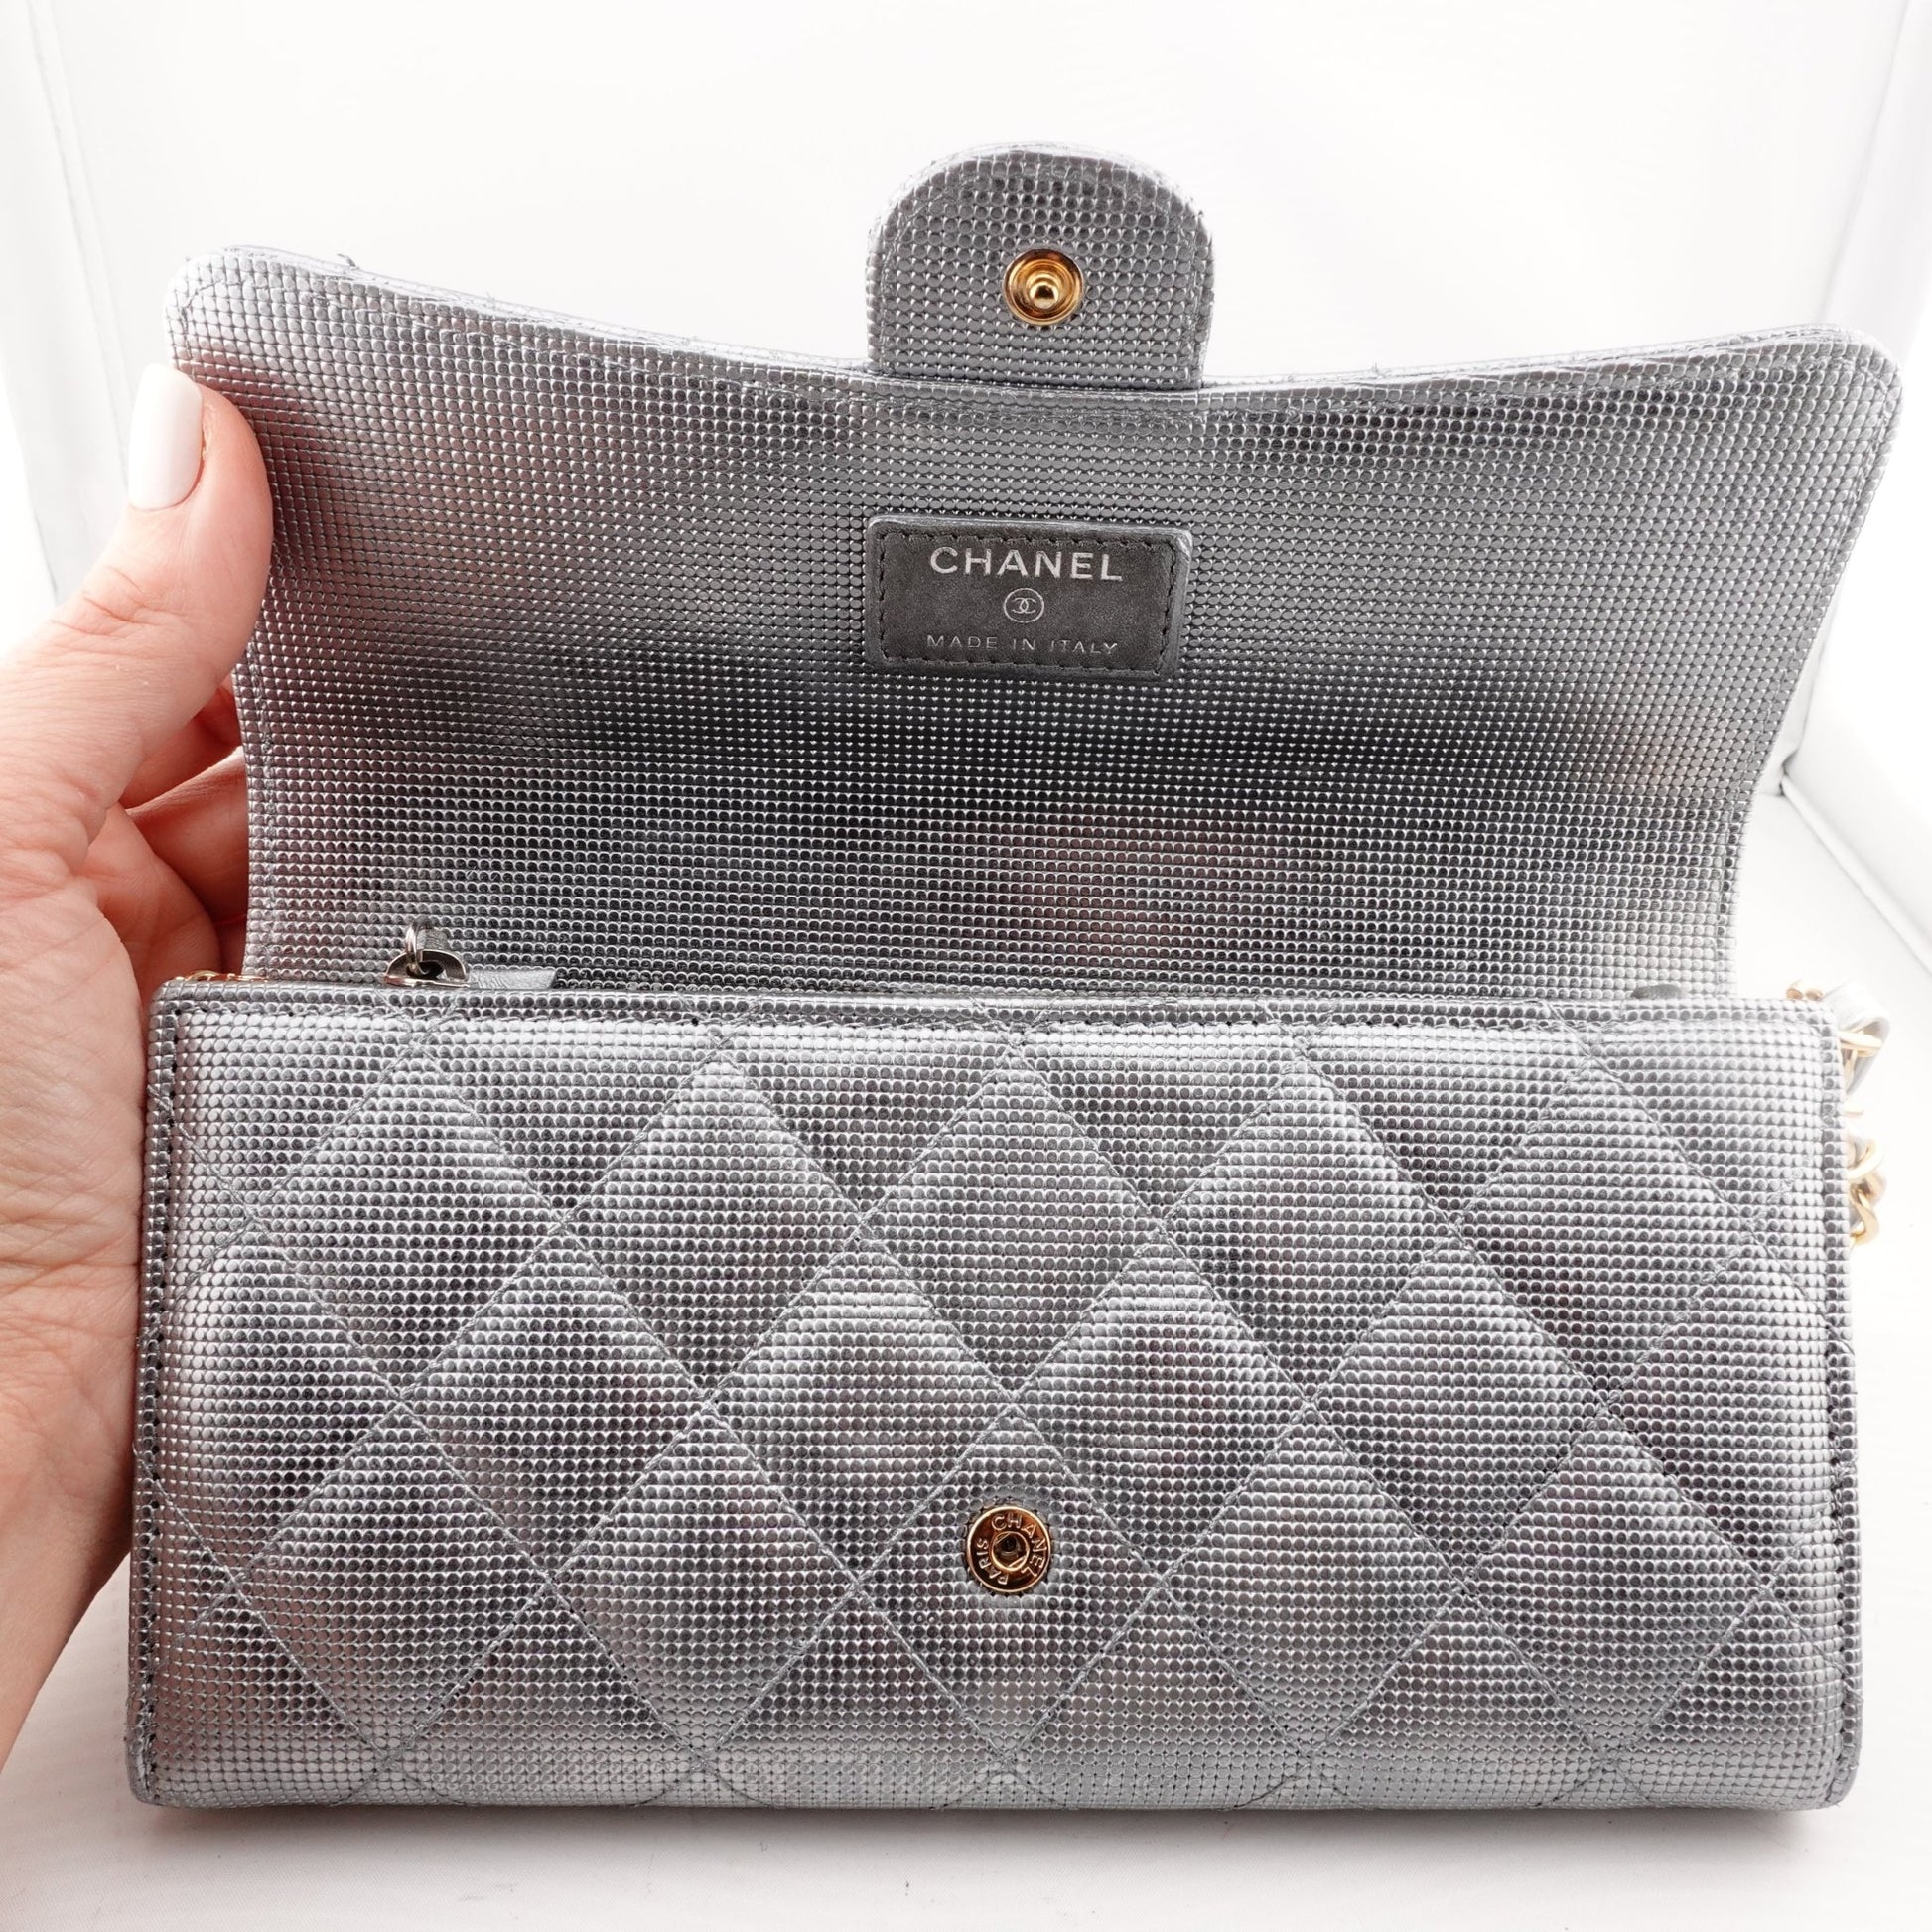 CHANEL Perforated Leather Classic Flap Gusseted Wallet on Chain - Bag Envy